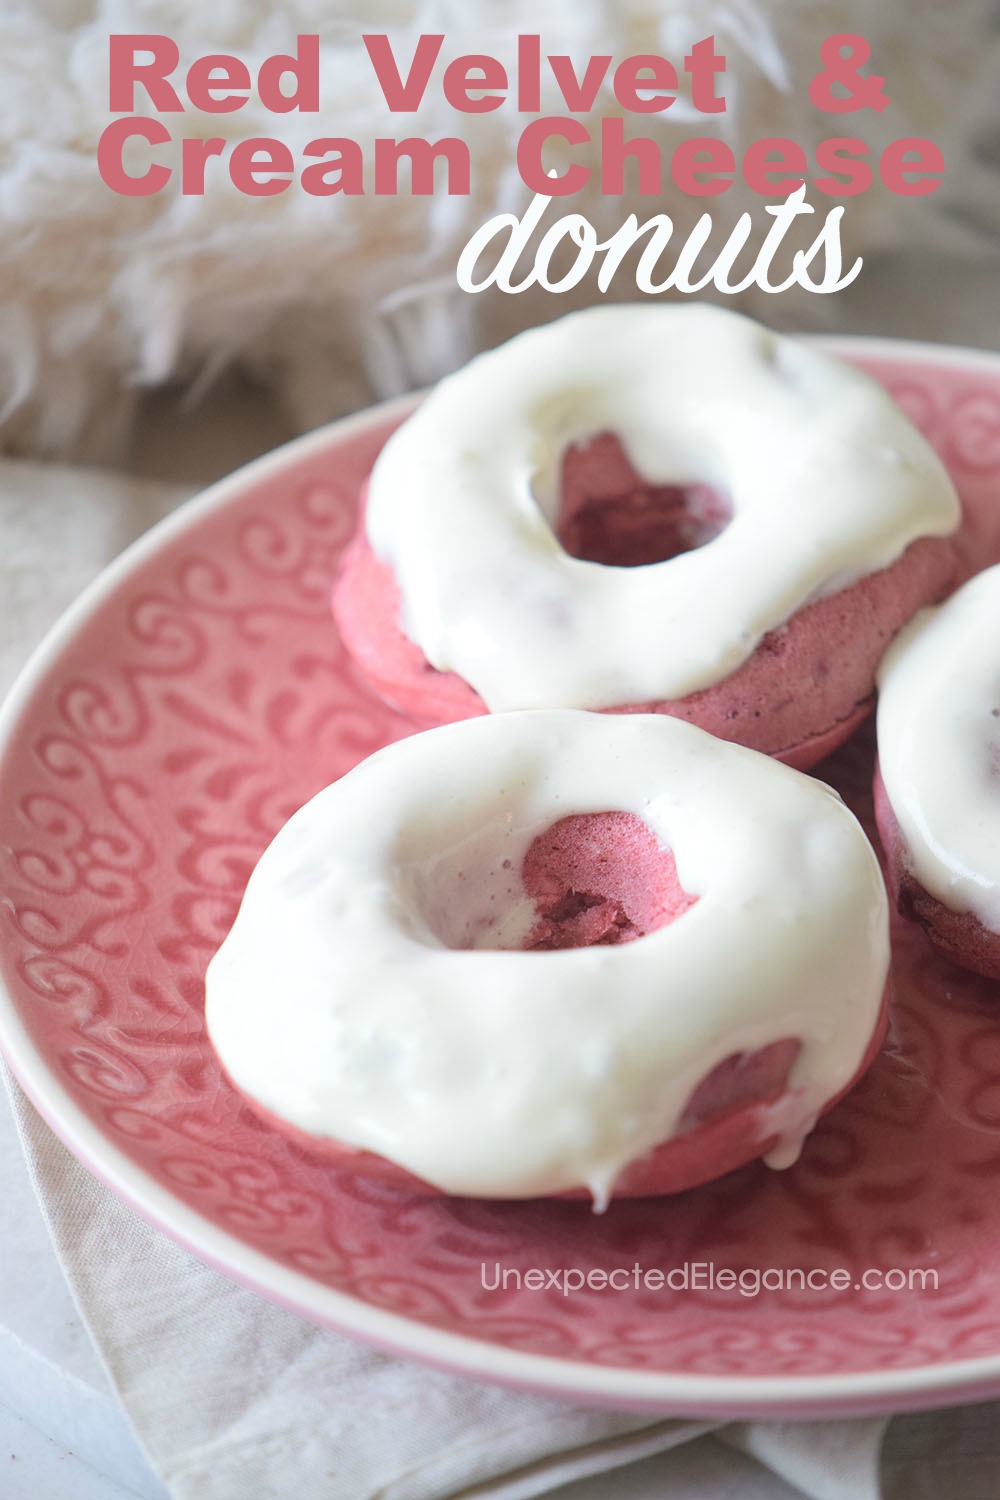 These Red Velvet donuts are so good...especially topped with cream cheese icing!! They are the perfect combo of cake and donut. They're also a great Valentine's Day treat.